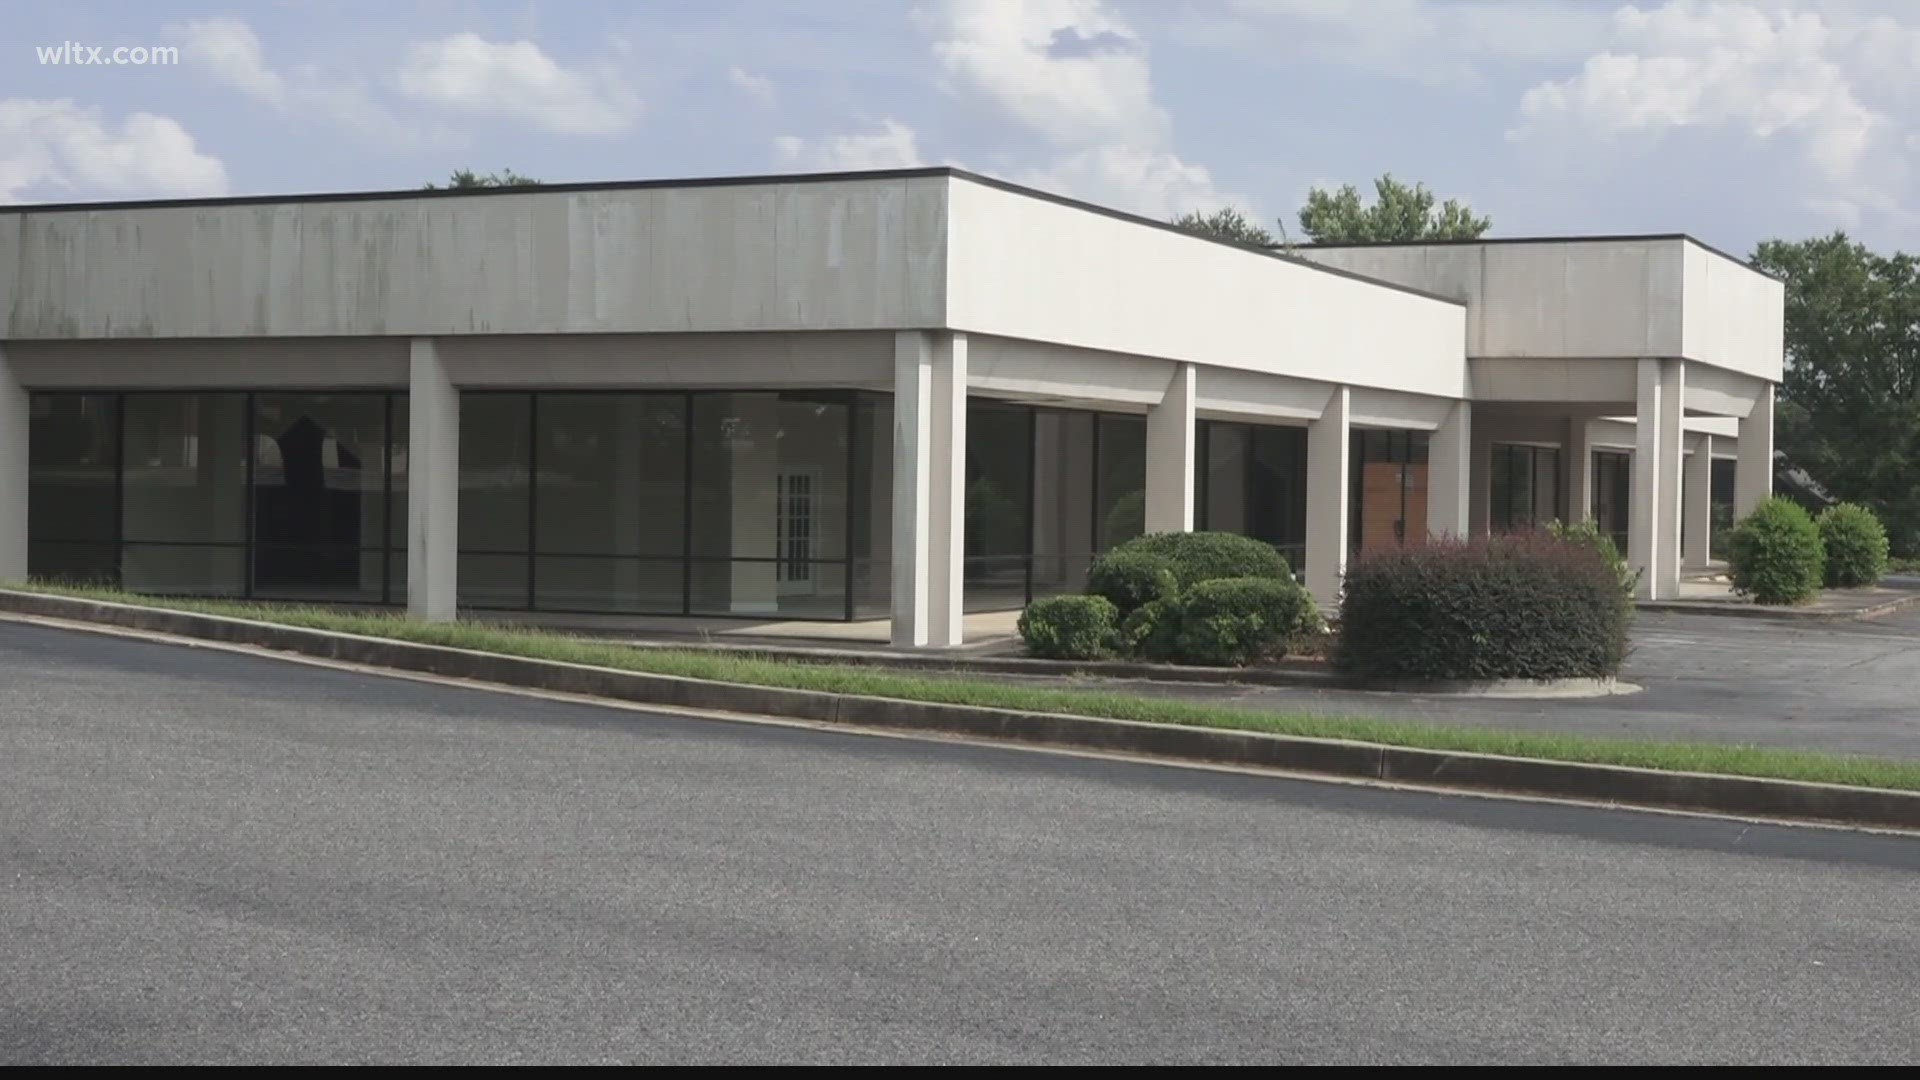 The old Haverty's building that sits right across from Dutch Square Mall could soon be a grocery store.